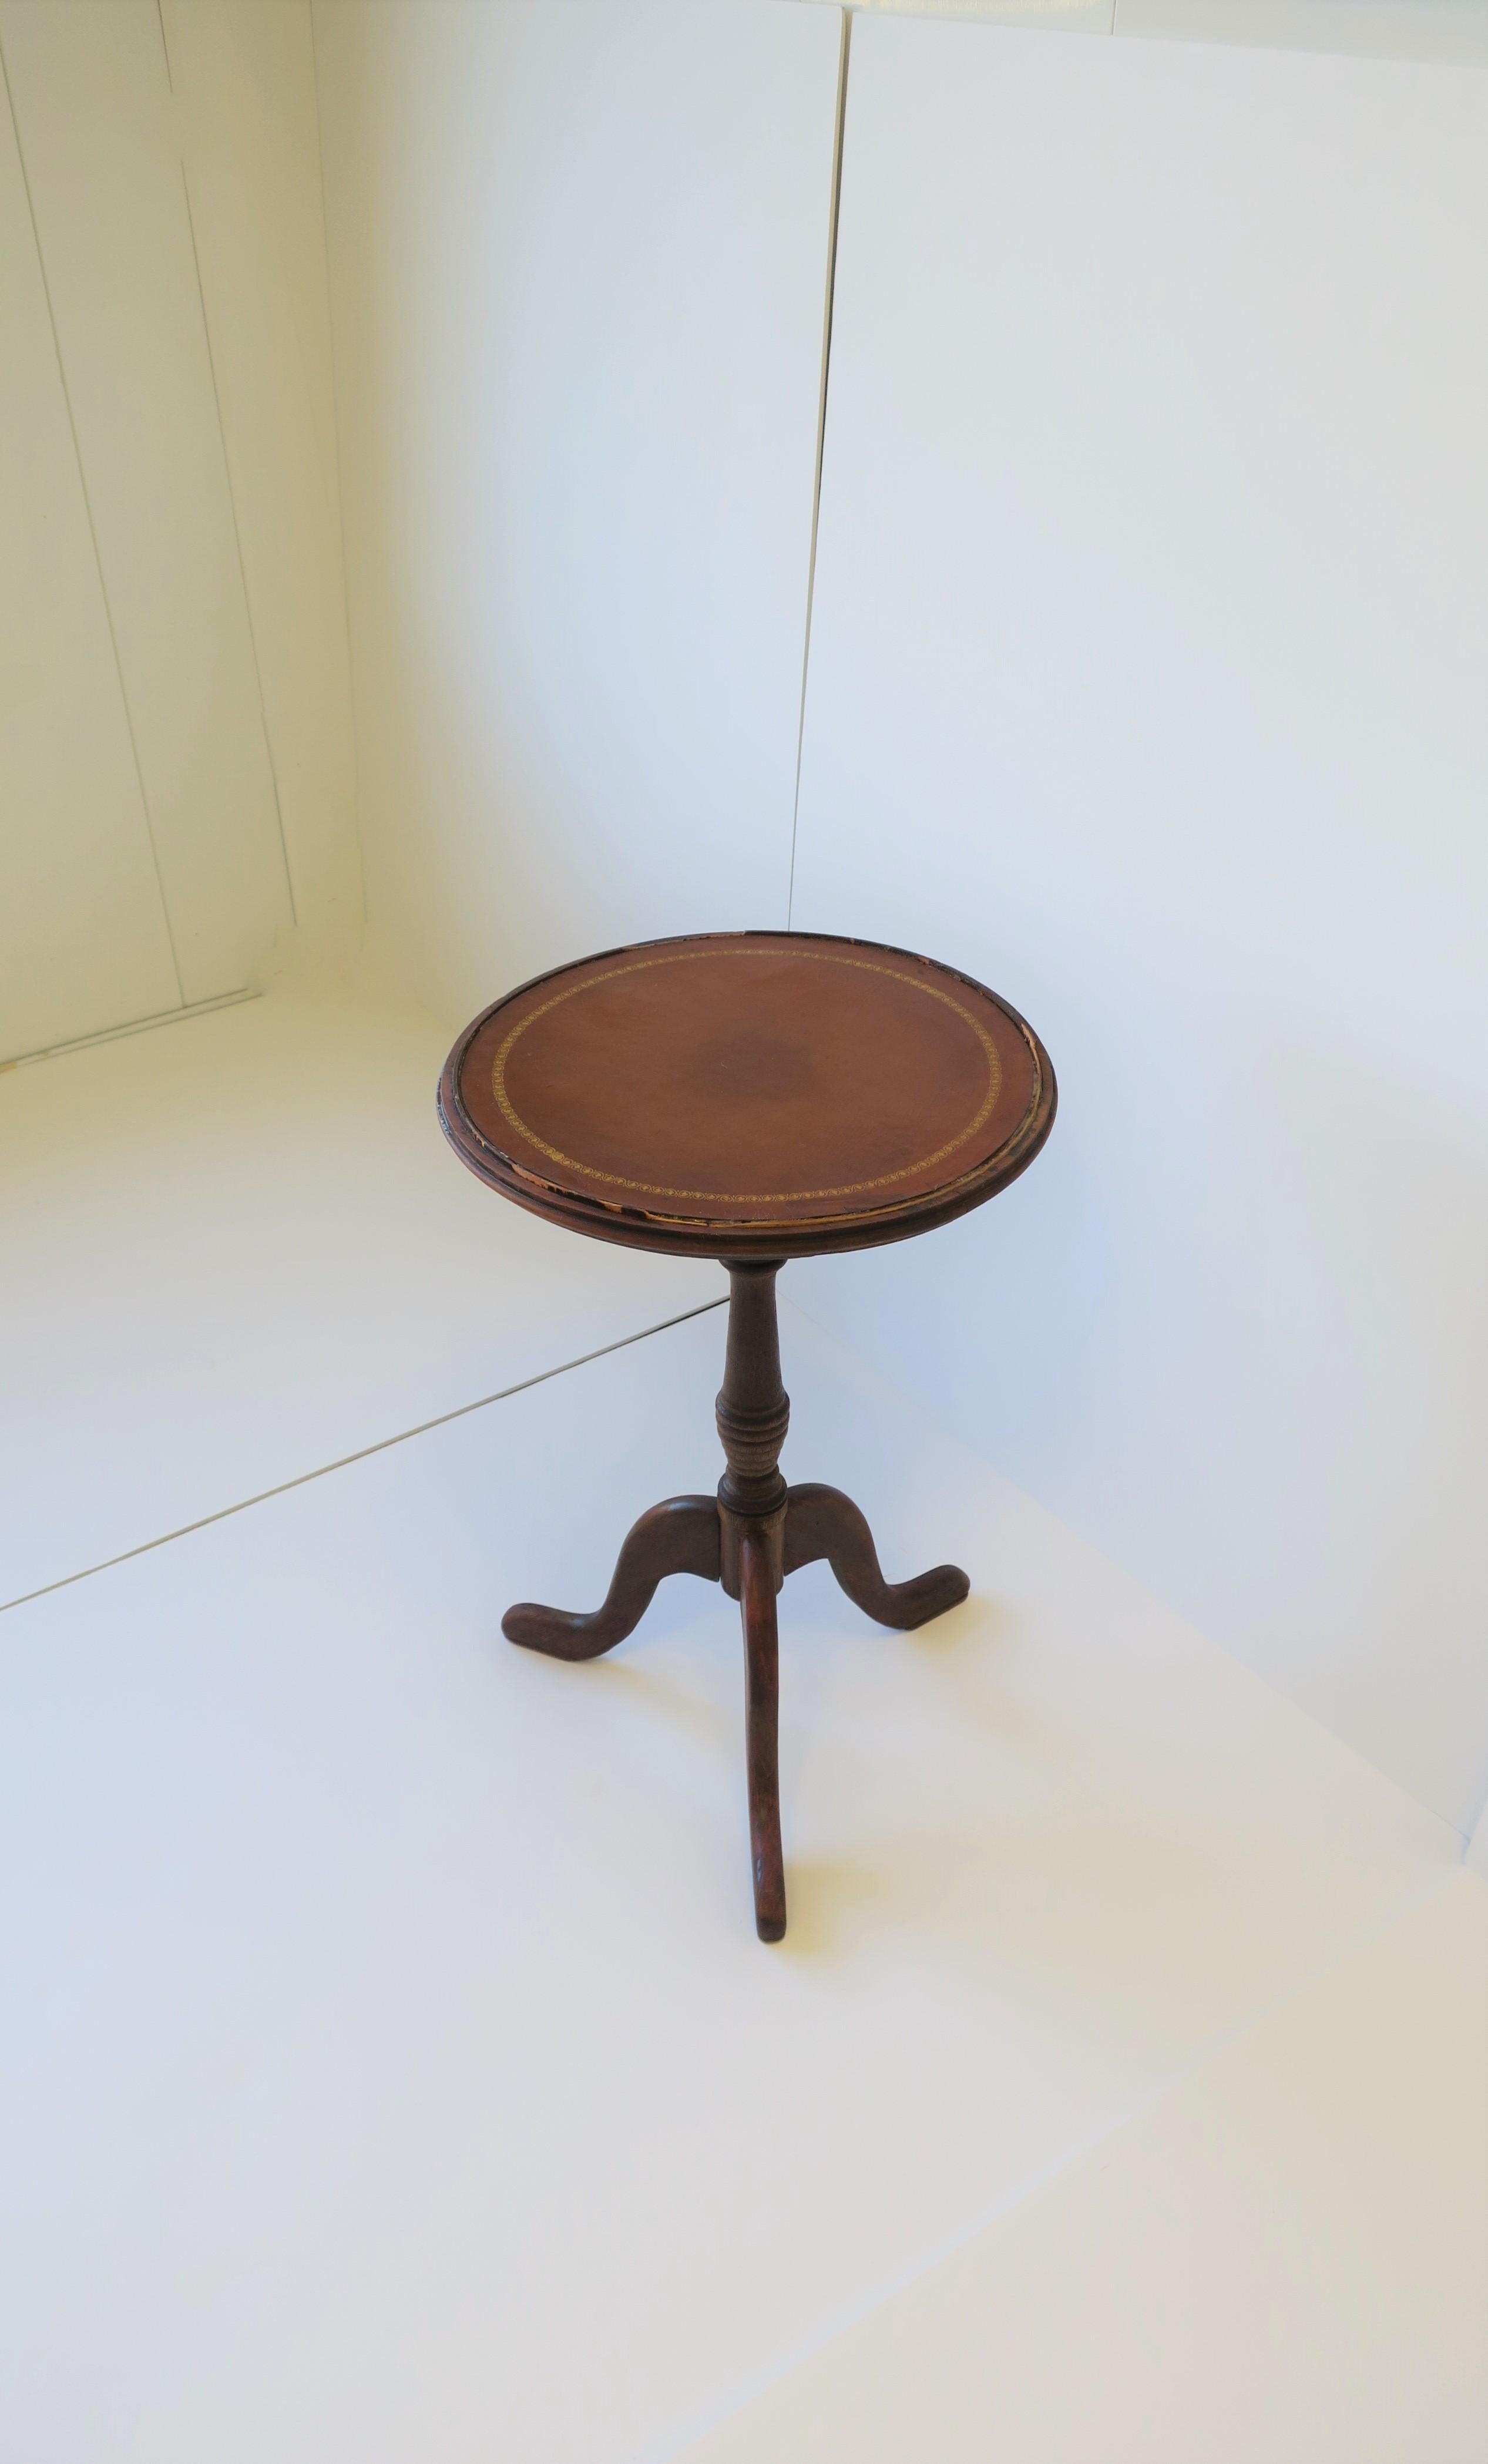 A European tripod leather and wood side or drinks table, circa mid-20th century, Europe (probably England, but maybe France.) Table has a honey brown leather top with gold edge embossed detailing, and a tripod wood base. 

Table measures: 14